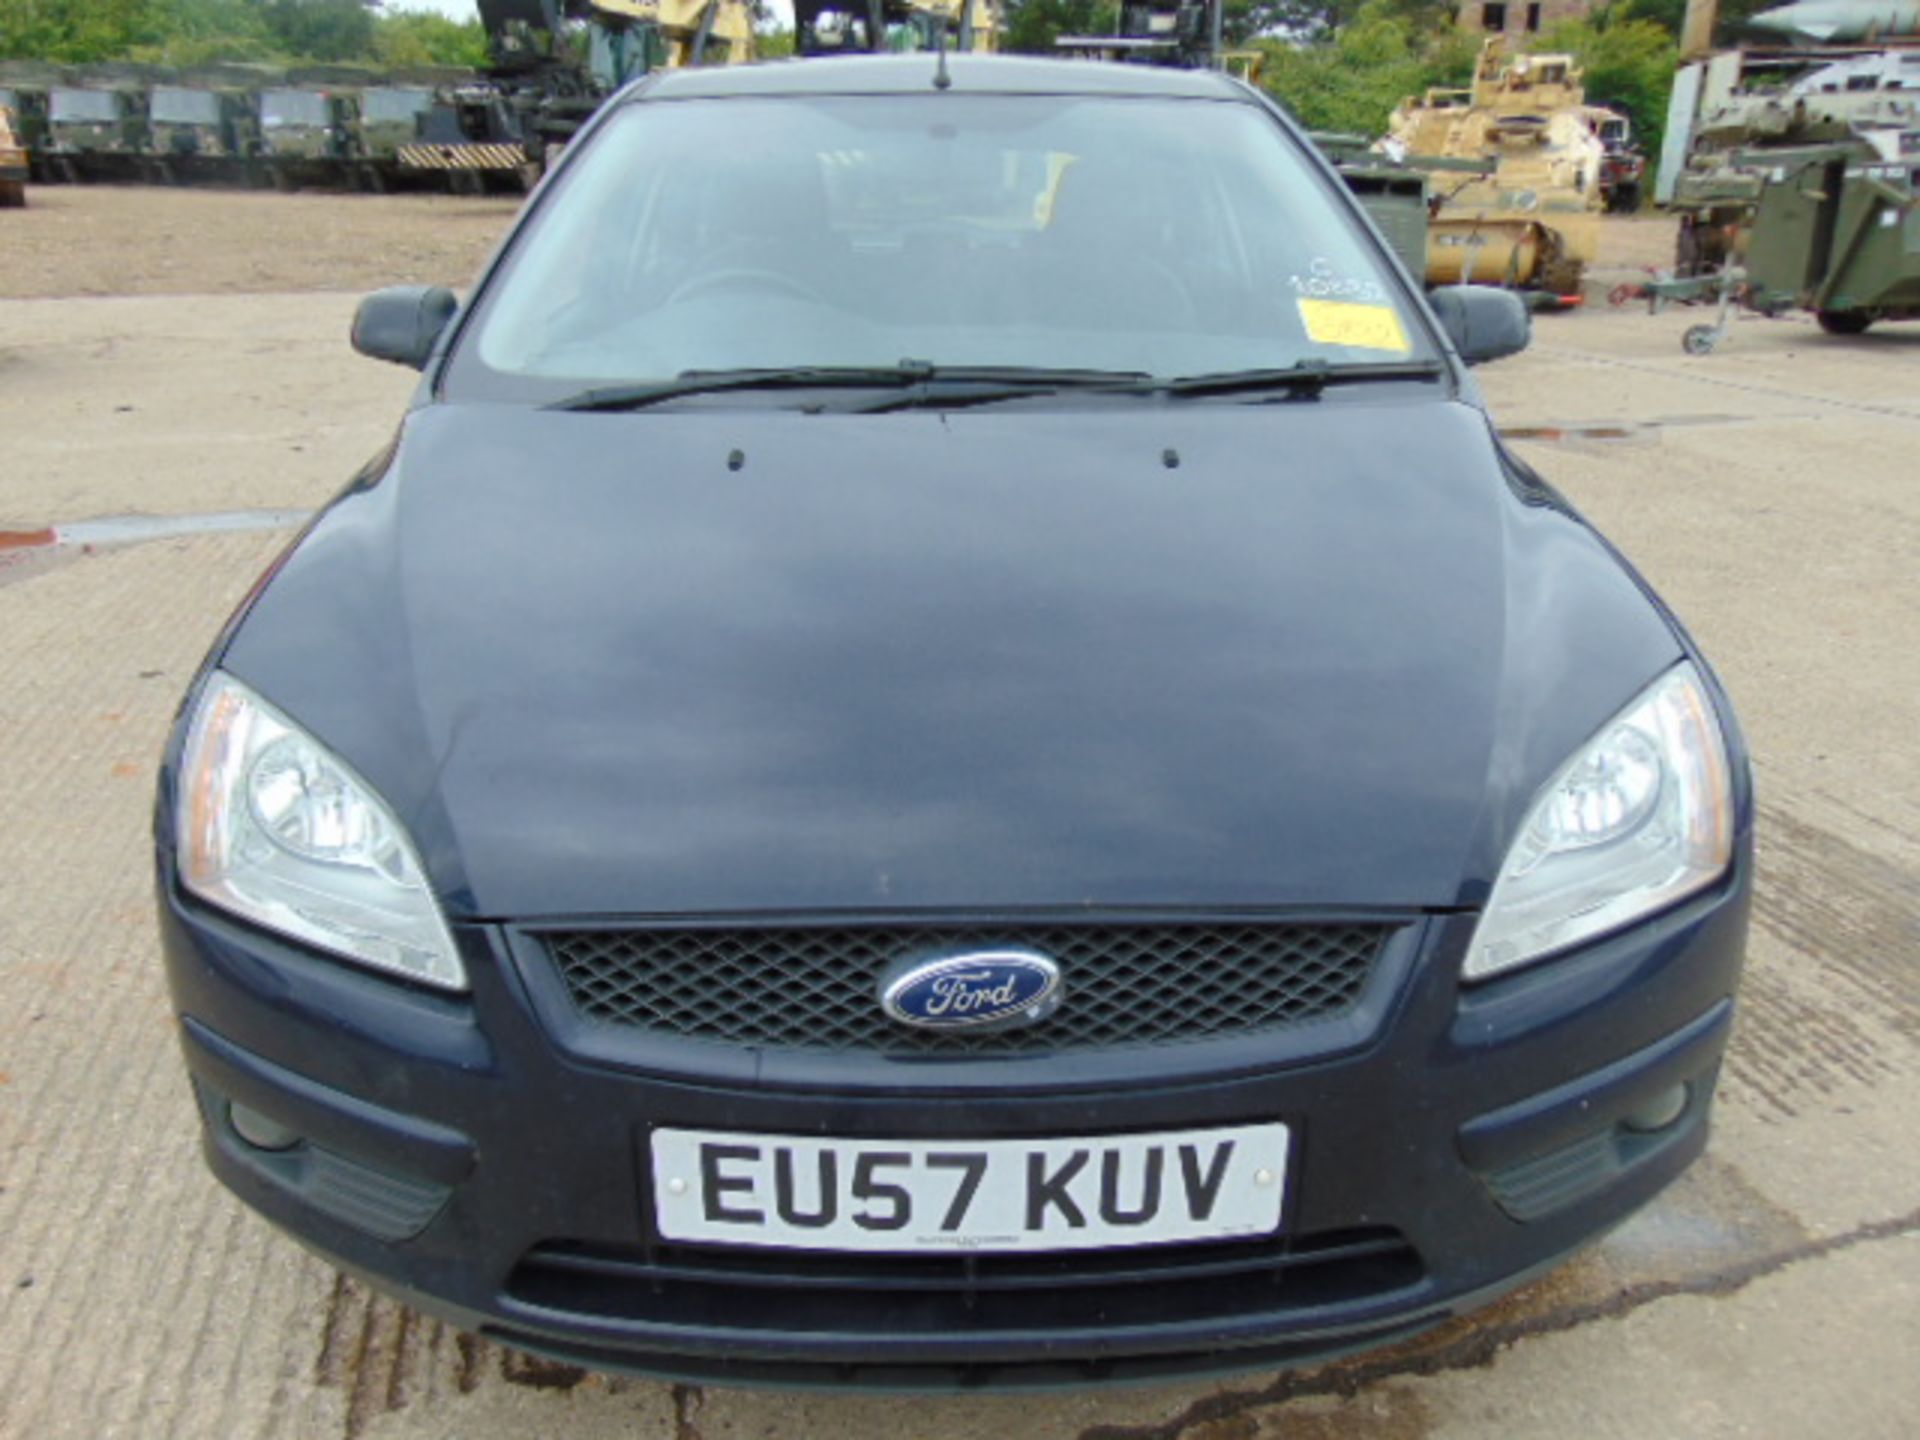 Ford Focus 1.8 TDCI Style Hatchback - Image 2 of 18